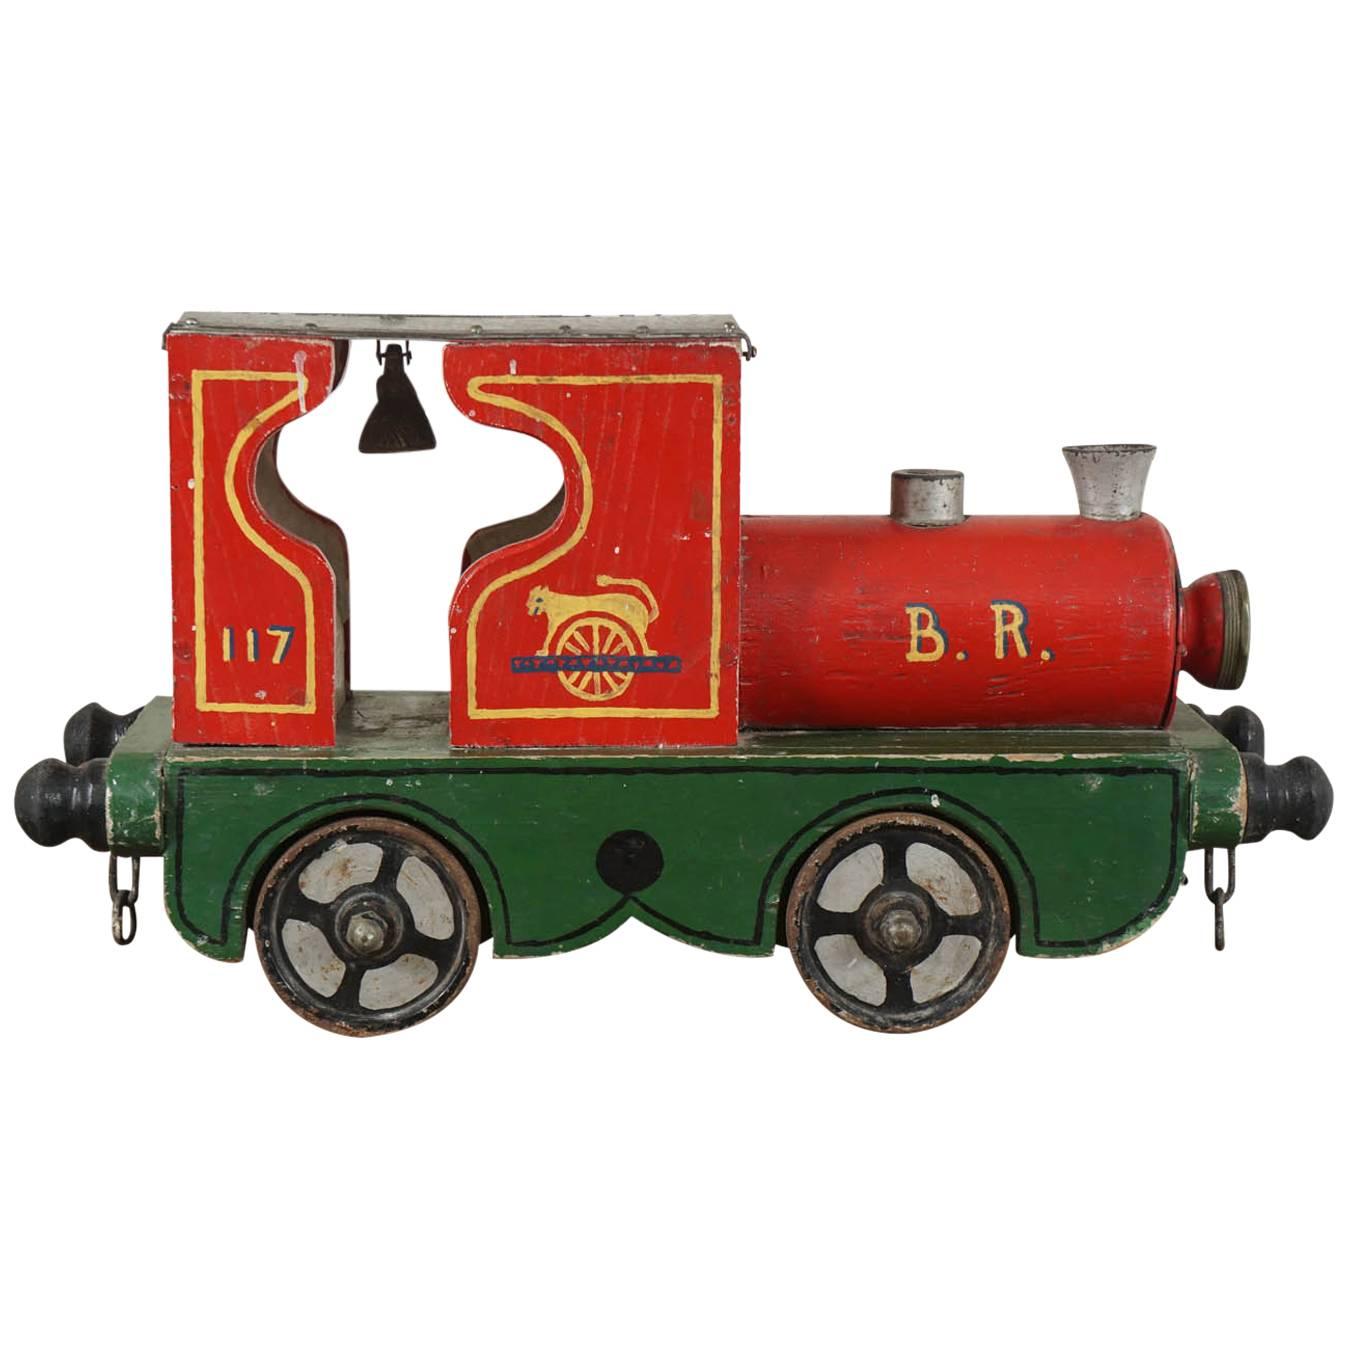 Toy Train from and English Circus